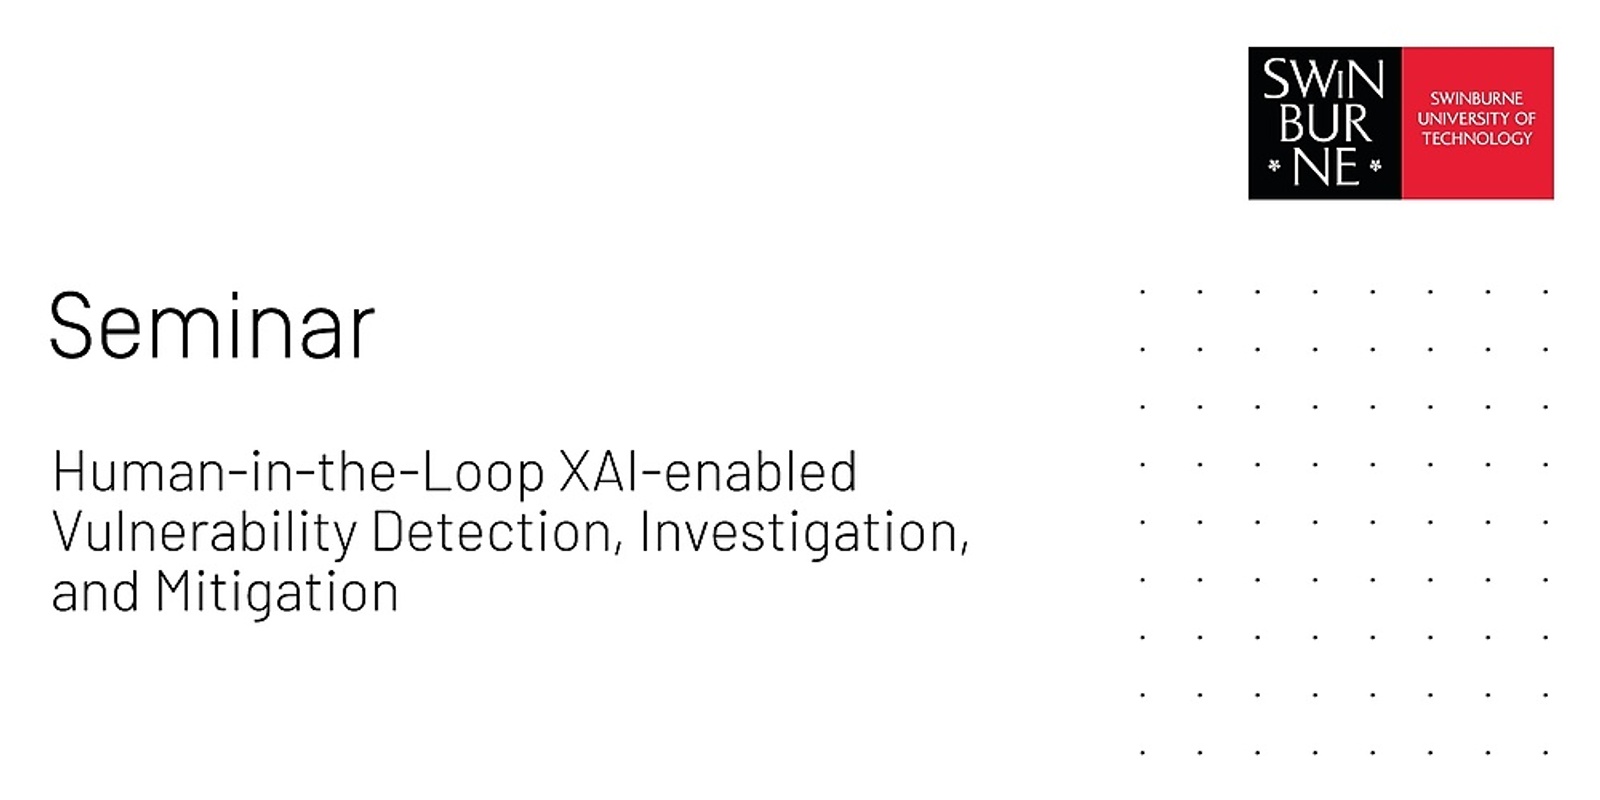 Banner image for Seminar: Human-in-the-Loop XAI-enabled Vulnerability Detection, Investigation, and Mitigation